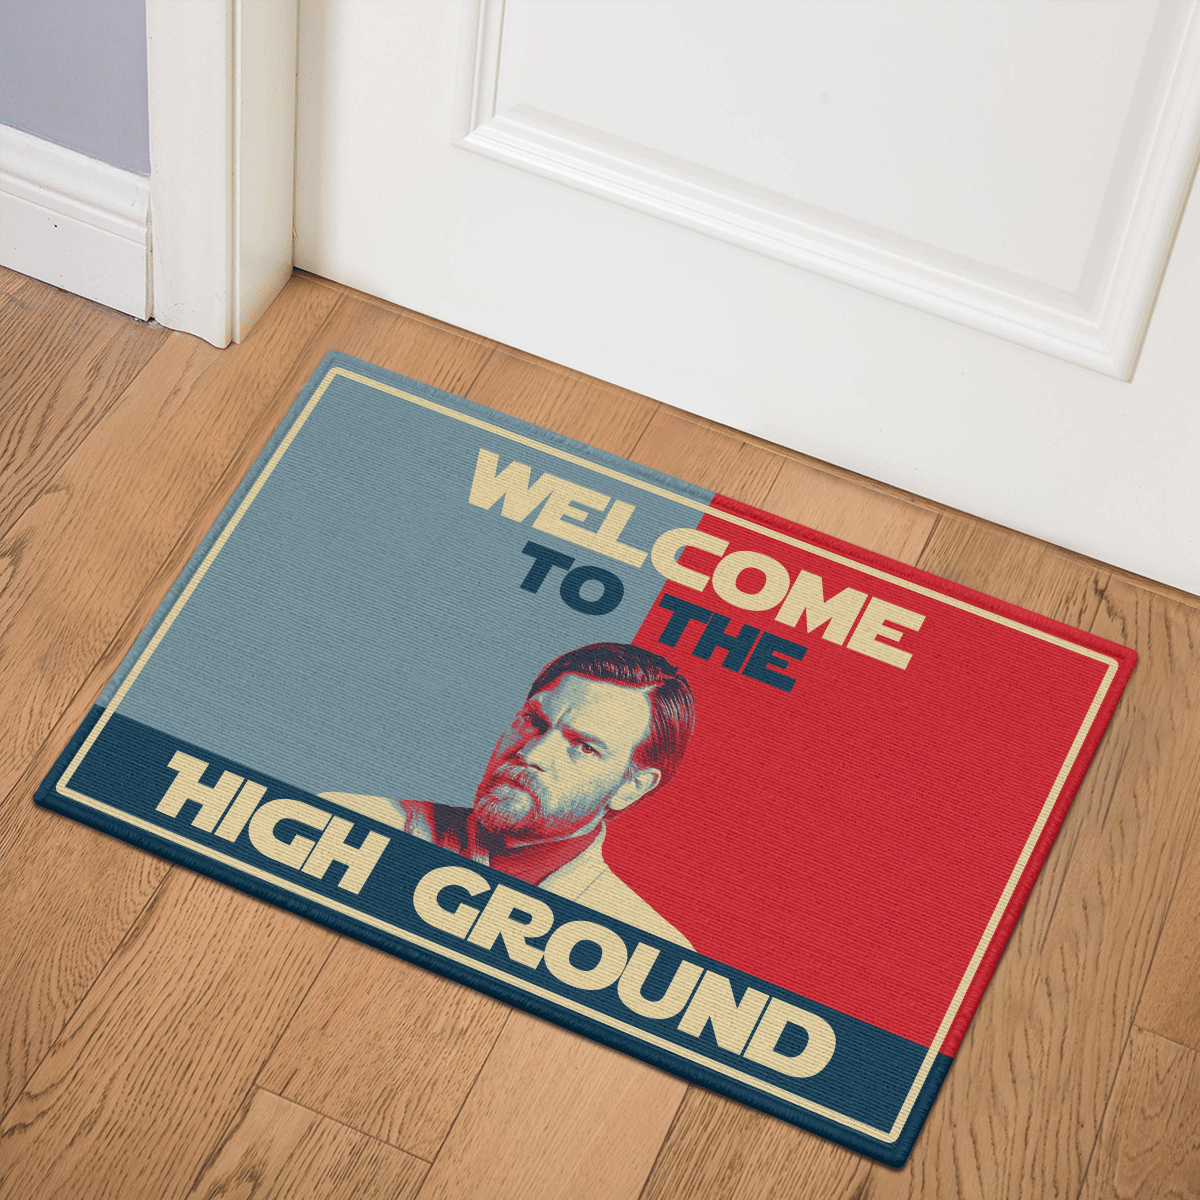 Welcome to the high ground doormat